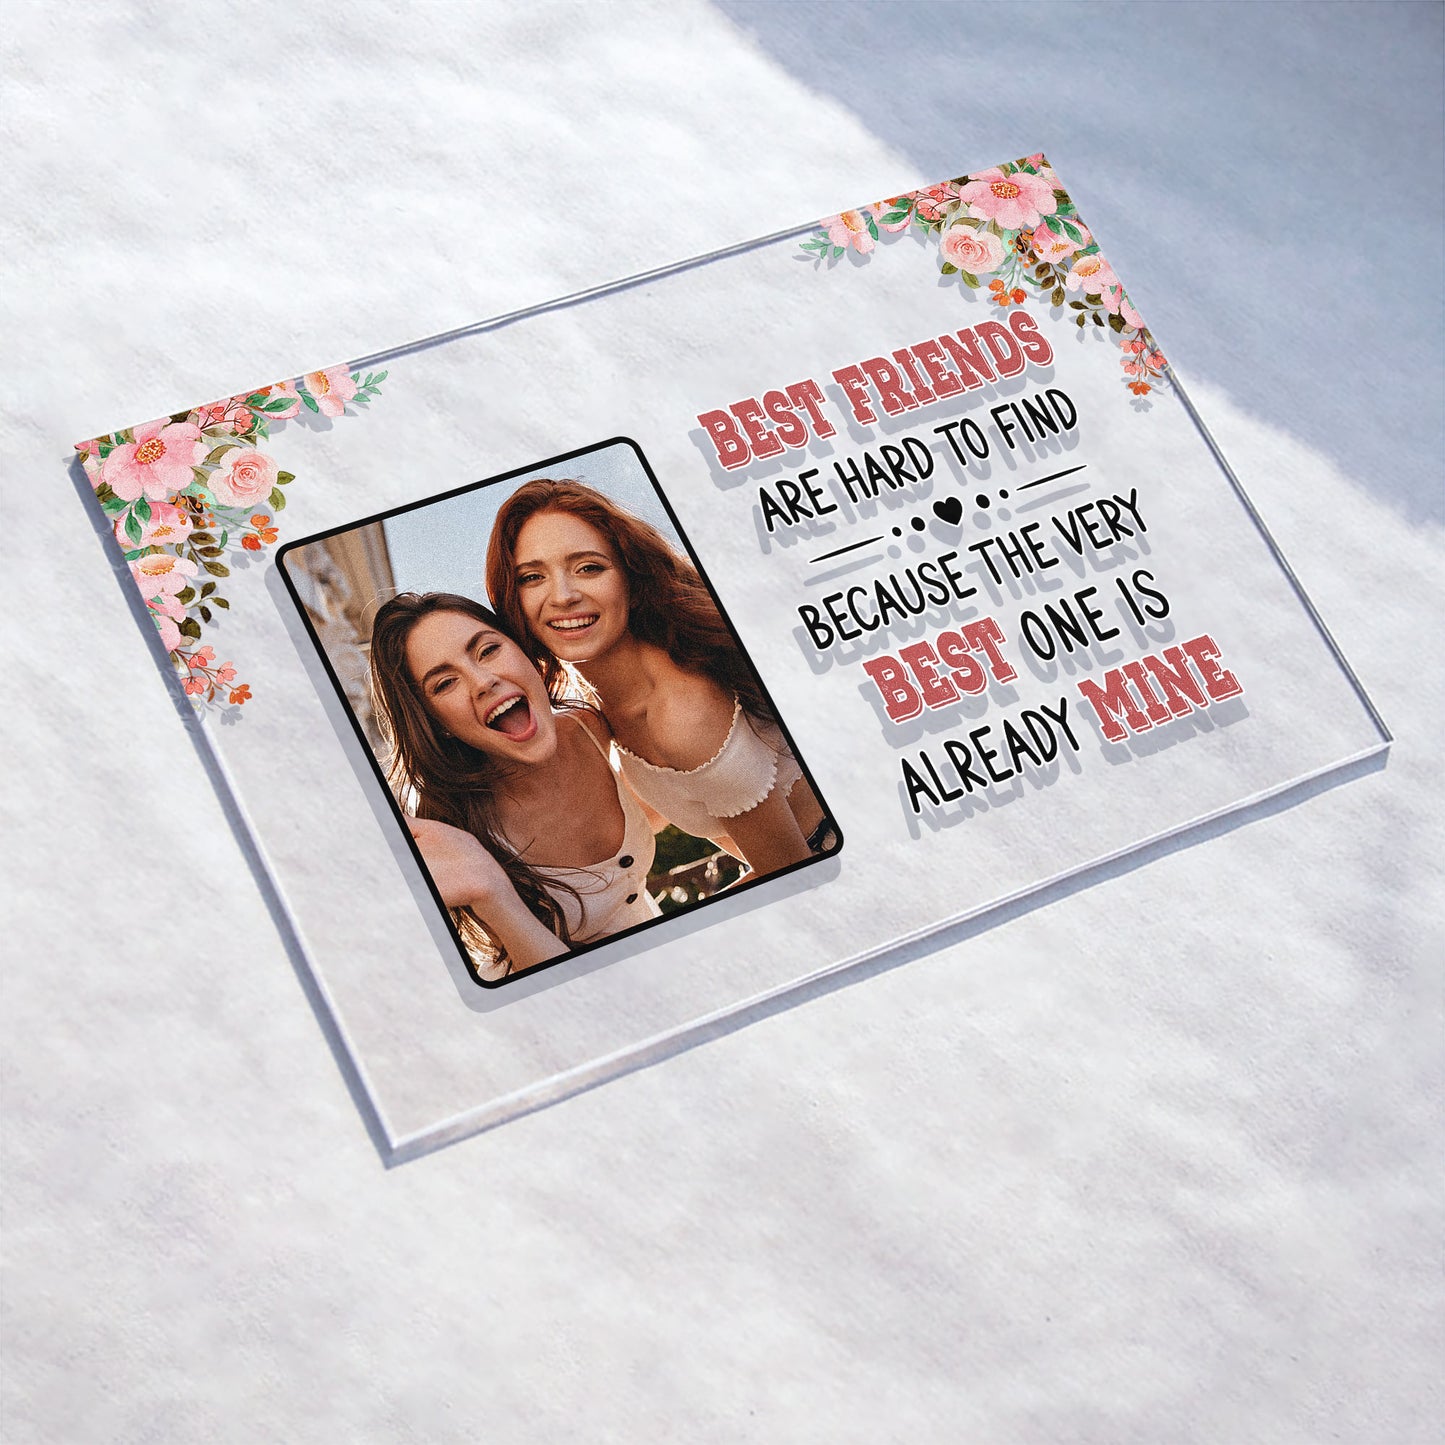 Best Friends Are Hard To Find - Personalized Acrylic Photo Plaque - Birthday, Friendship Day Gift For Besties, BFF, Friends